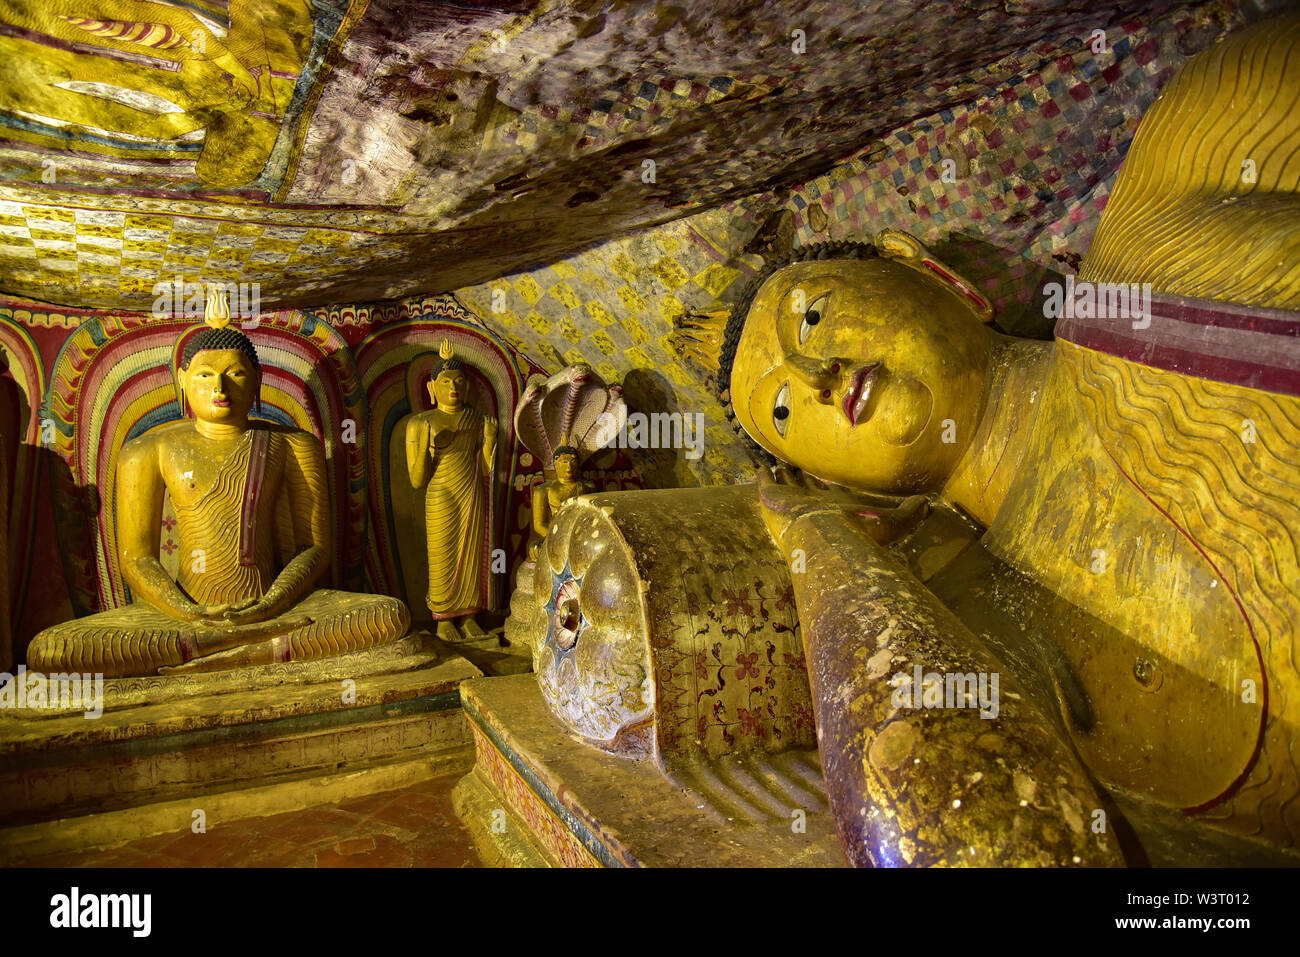 Buddha statues inside the painted Dambulla Cave temples depicting religious themes, dating from the 1st century BC, Matale District, Sri Lanka, Asia. Stock Photo